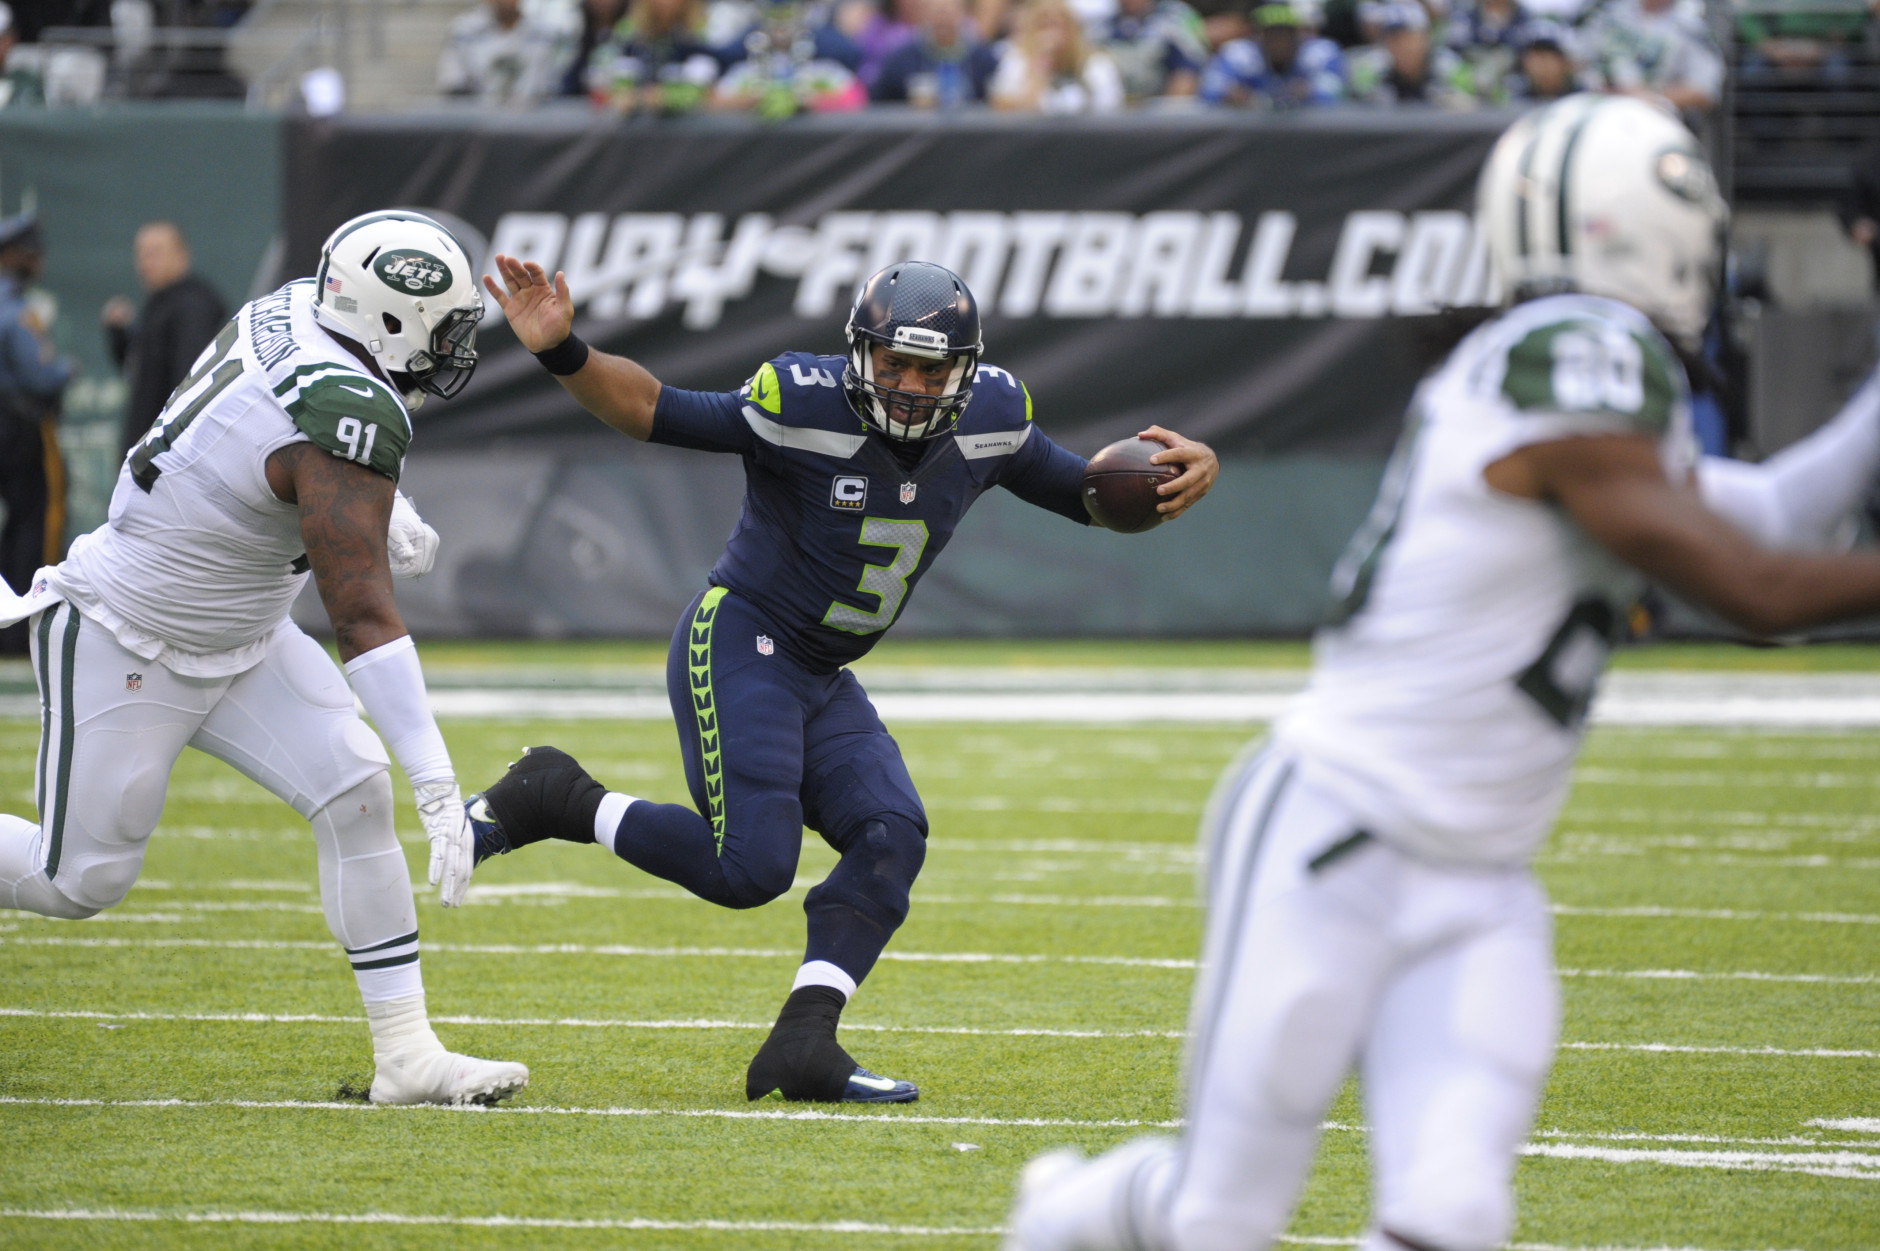 Seattle Seahawks quarterback Russell Wilson (3) runs away from New York Jets' Sheldon Richardson (91) during the second half of an NFL football game Sunday, Oct. 2, 2016, in East Rutherford, N.J.  (AP Photo/Bill Kostroun)